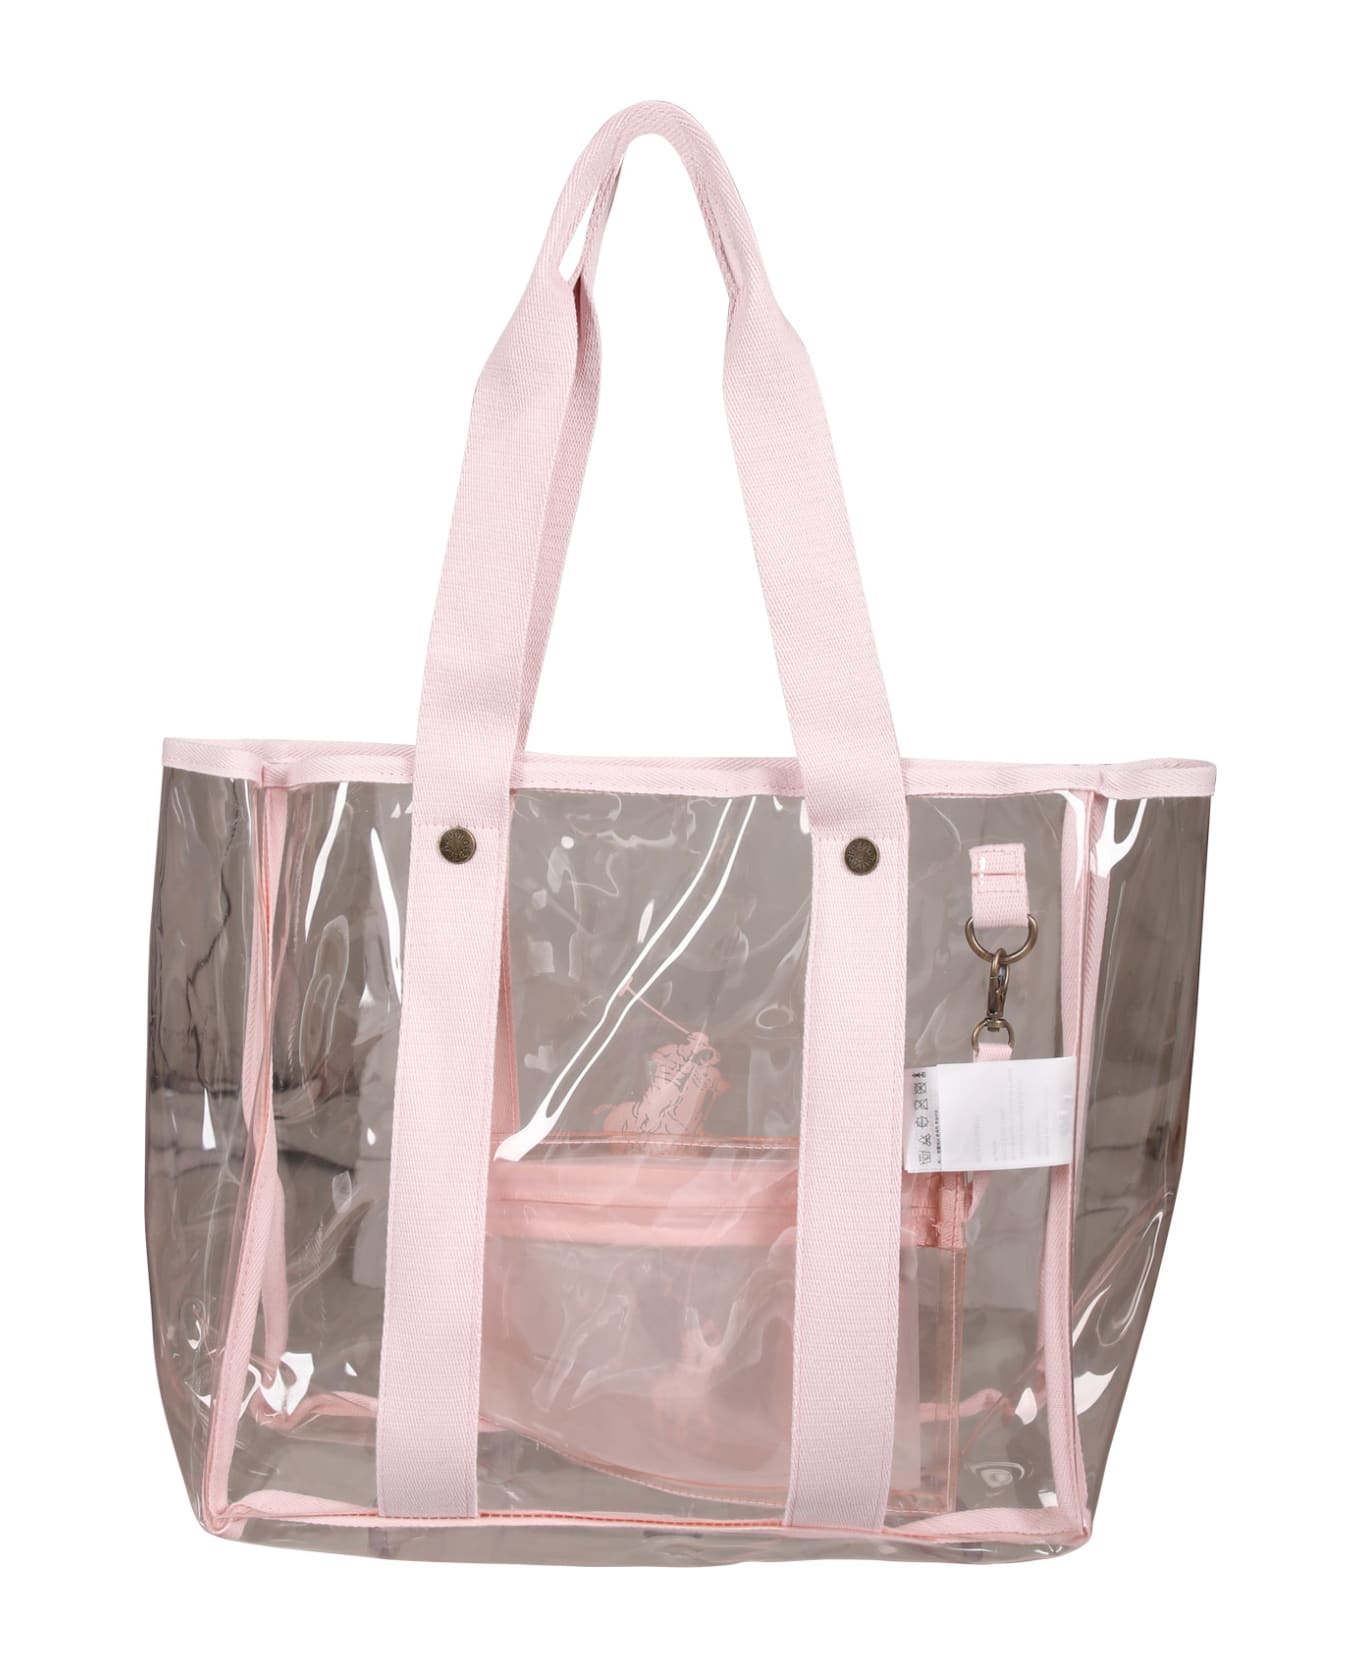 Ralph Lauren Pink Bag For Girl With Pony - Pink